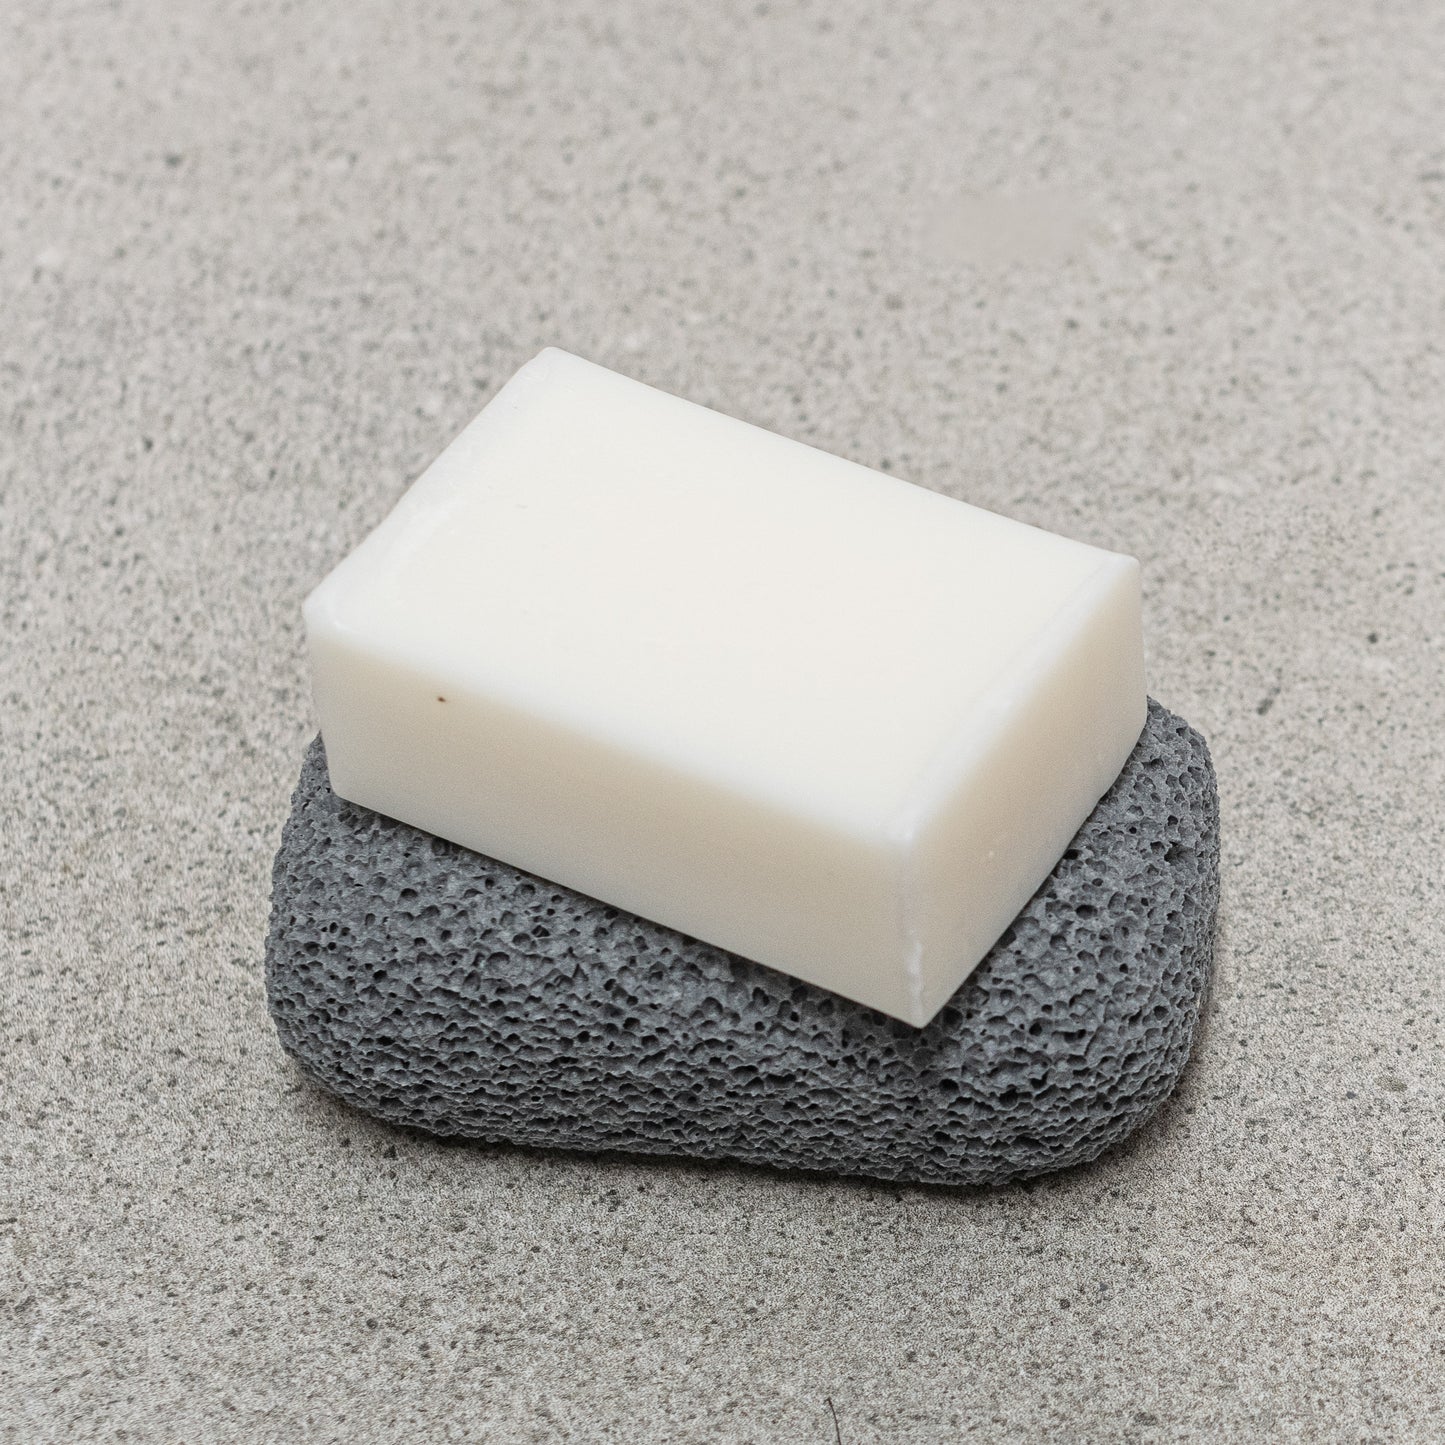 Soap and Pumice